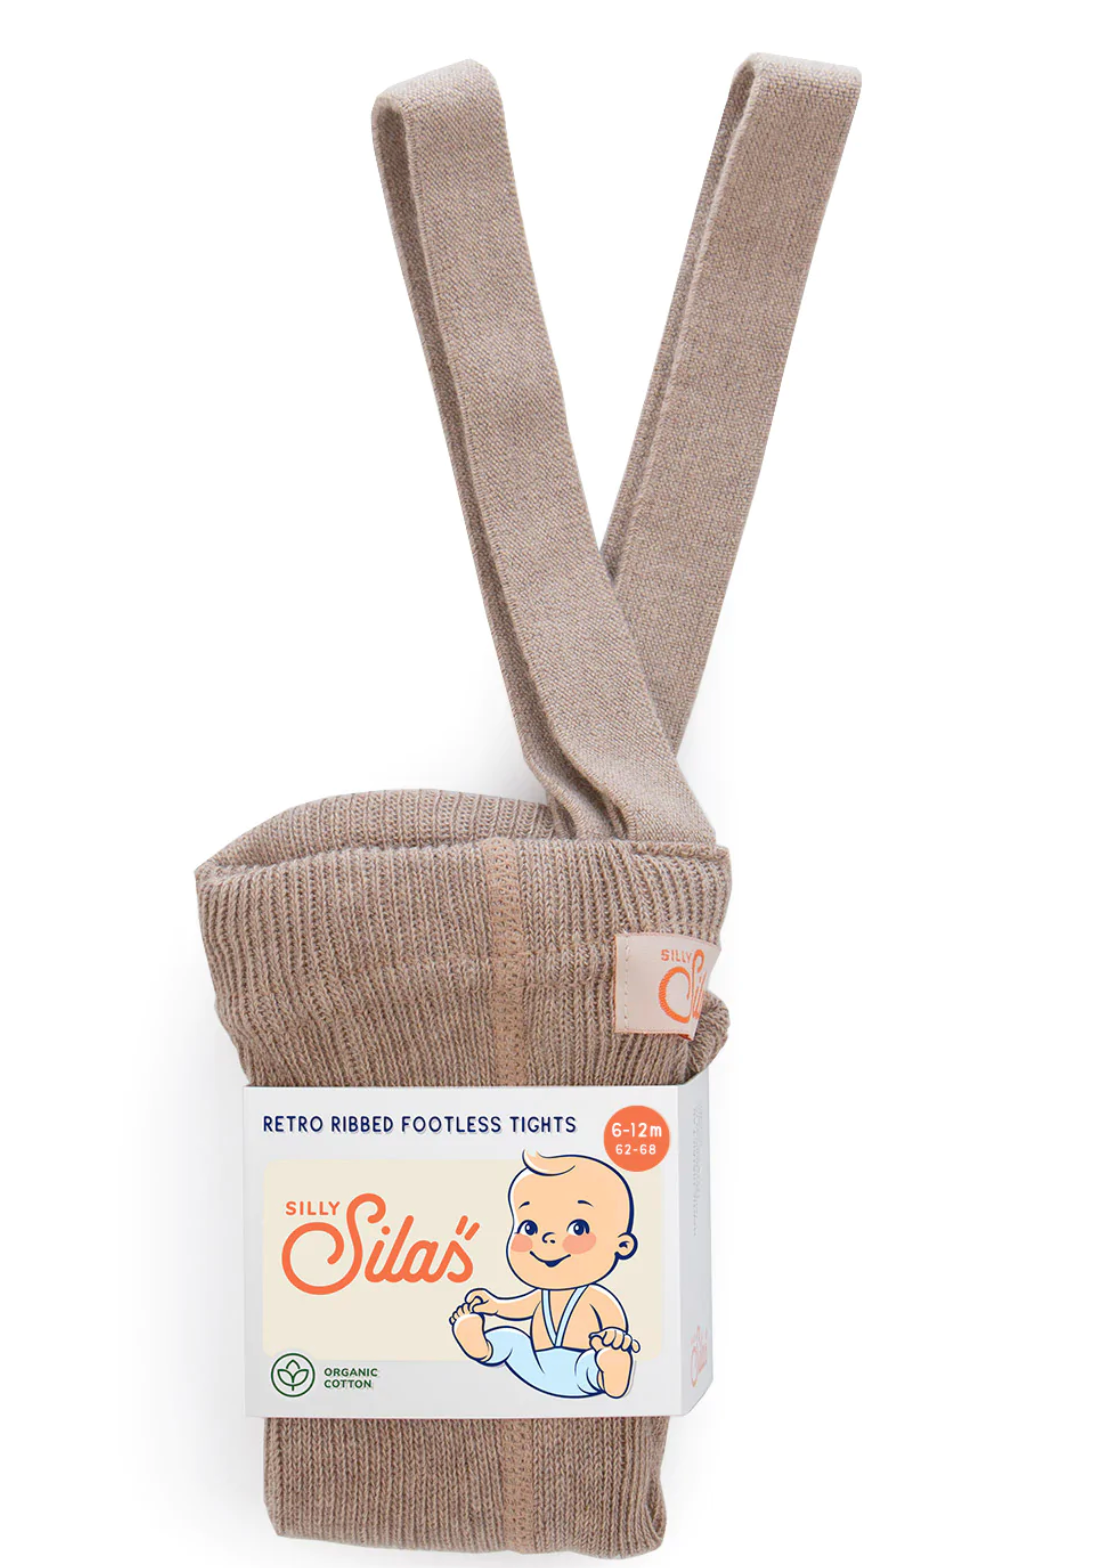 Silly Silas Footless Cotton Tights - Peanut - Silly Silas, Baby Clothes, Fox & Bramble